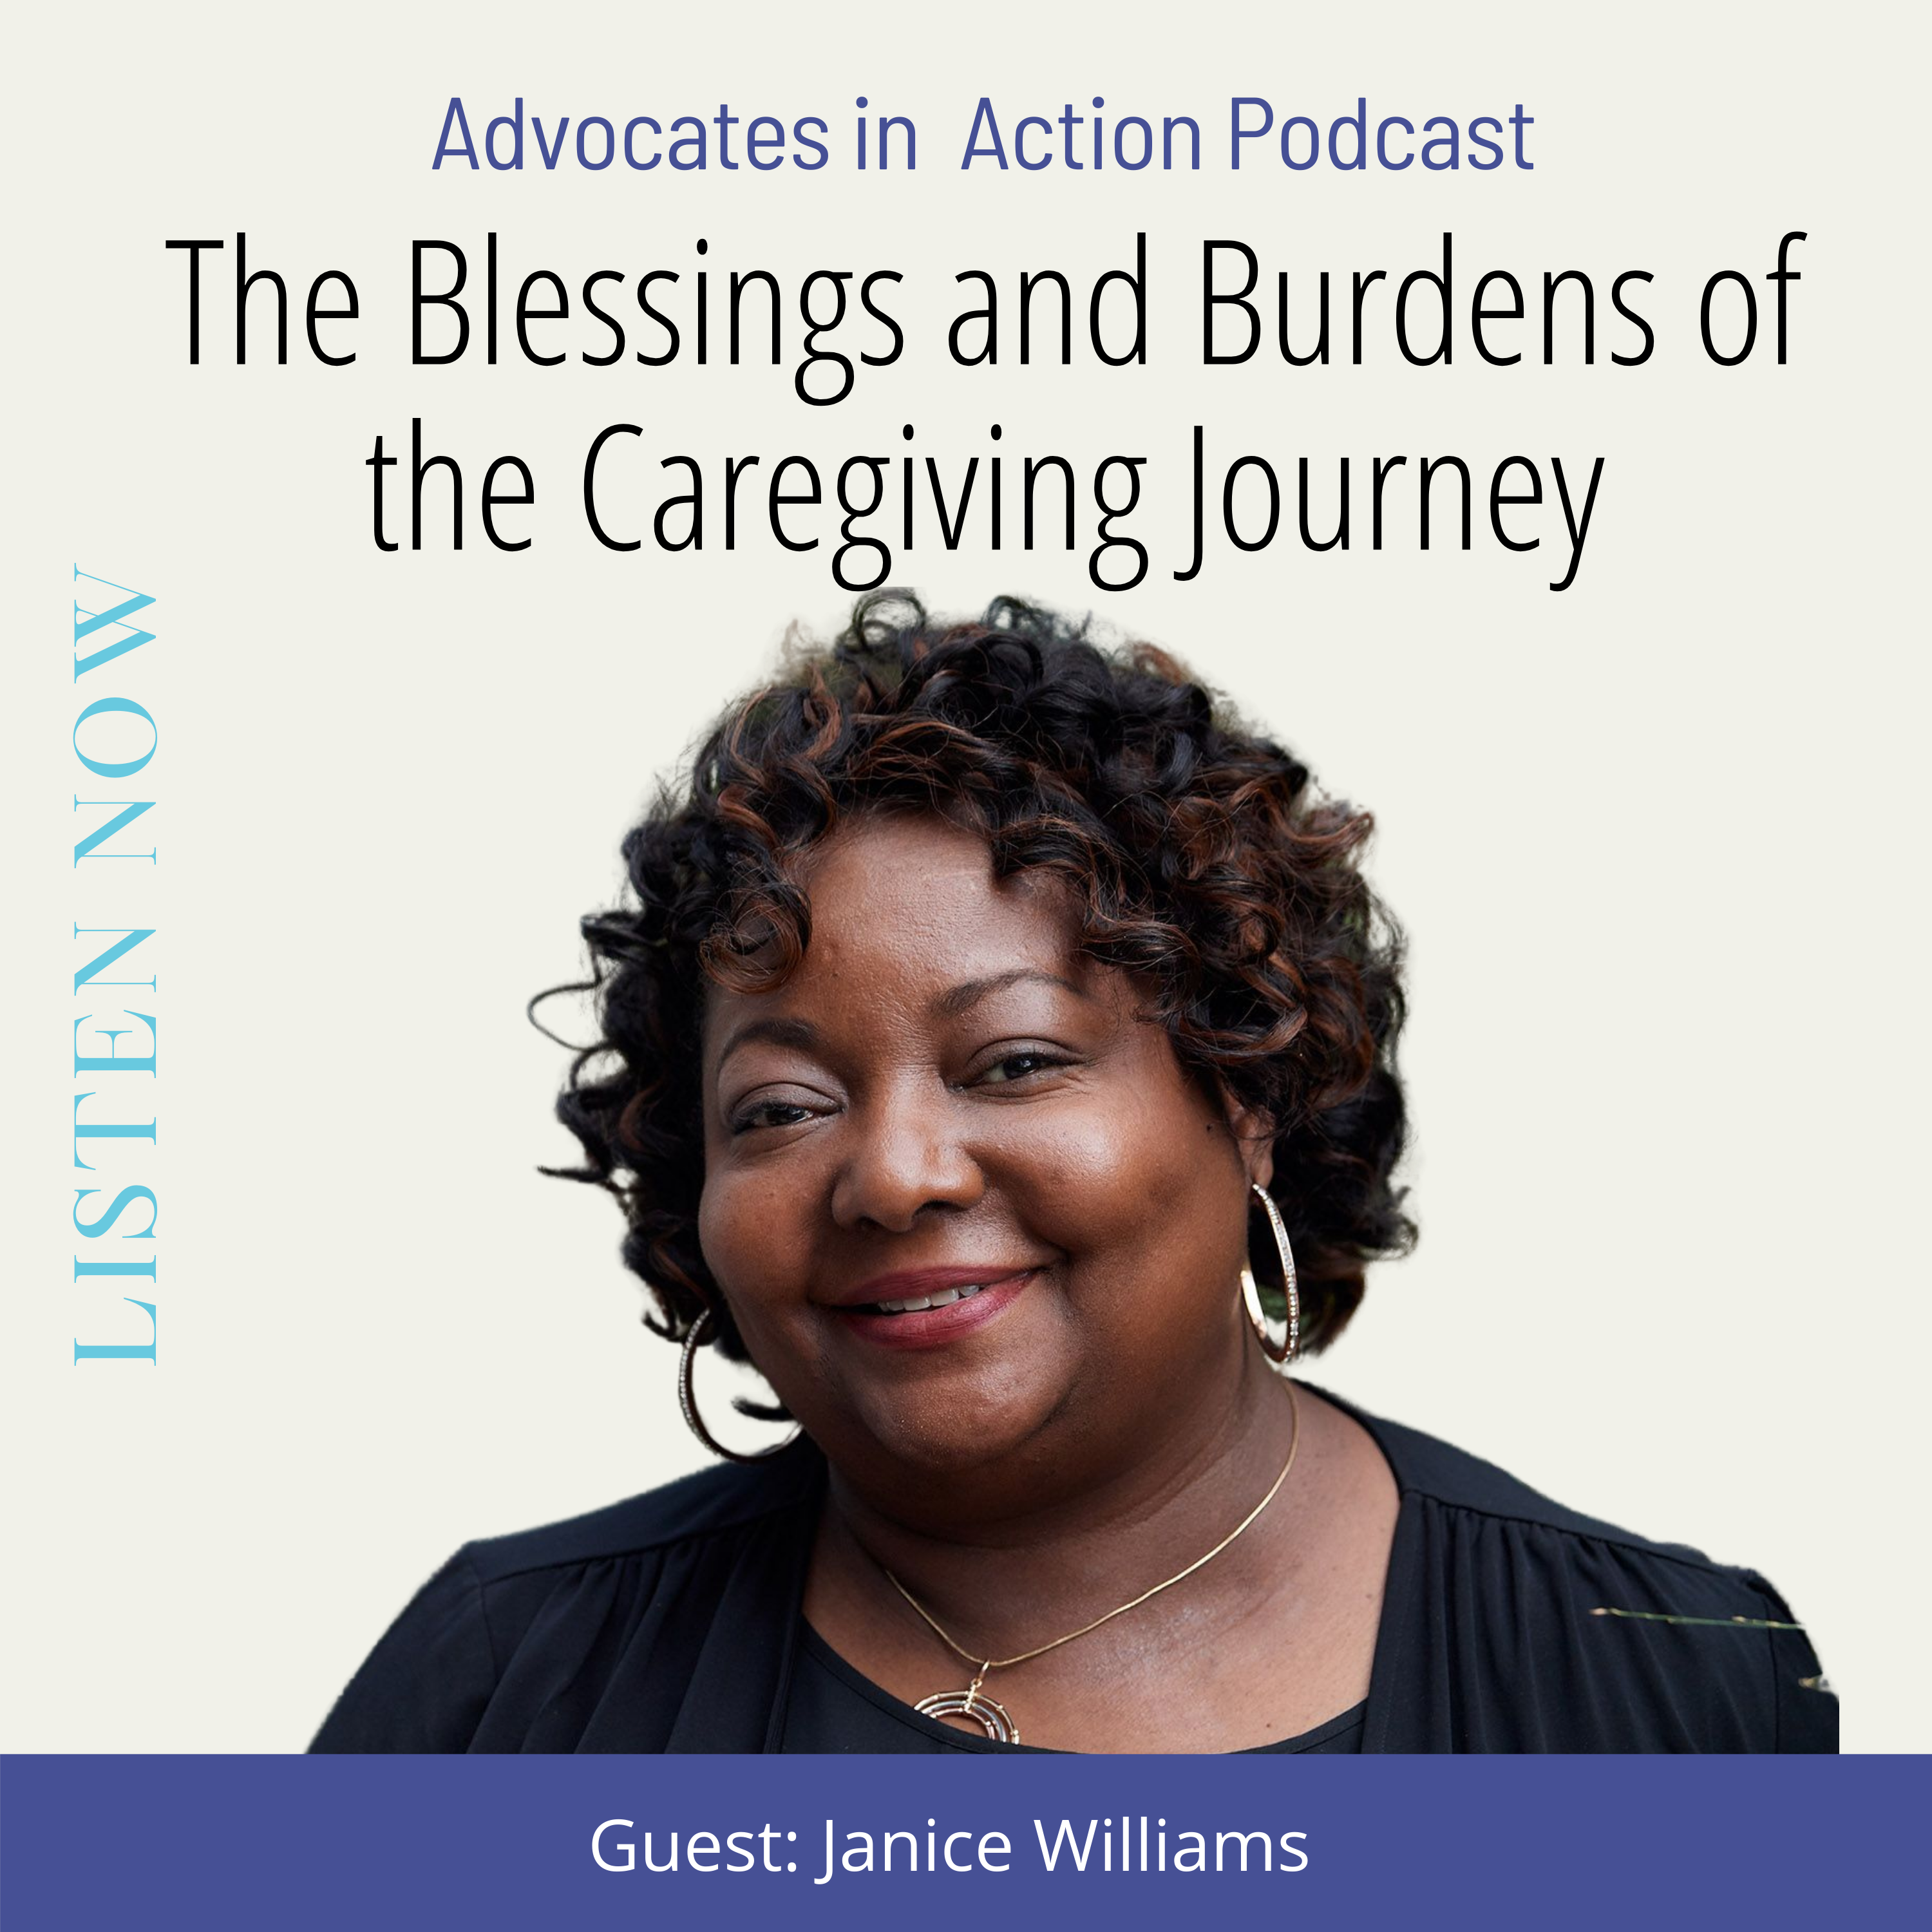 The Blessings and Burdens of the Caregiving Journey